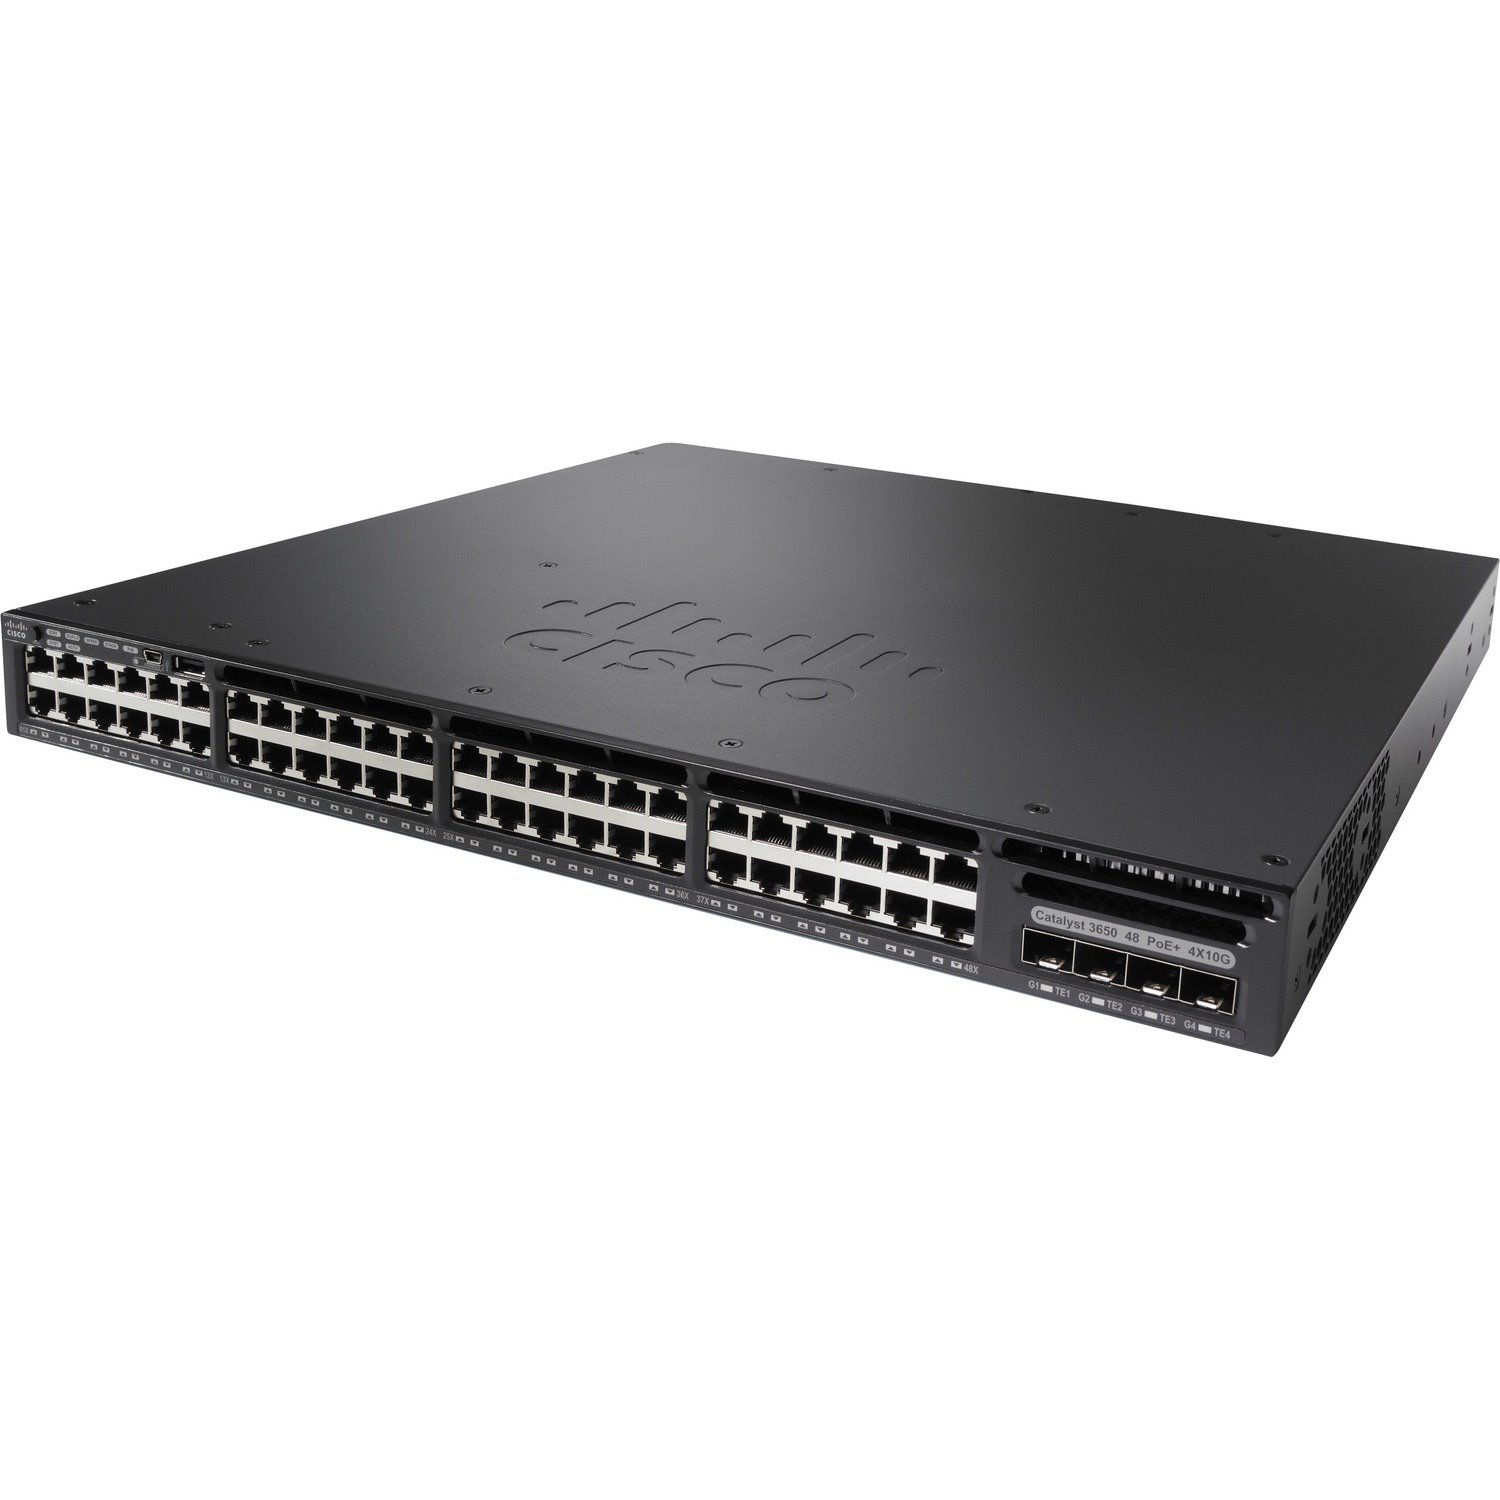 Cisco Catalyst 3650 WS-C3650-48PD 48 Ports Manageable Ethernet Switch - Gigabit Ethernet, 10 Gigabit Ethernet - 1000Base-T, 10GBase-X